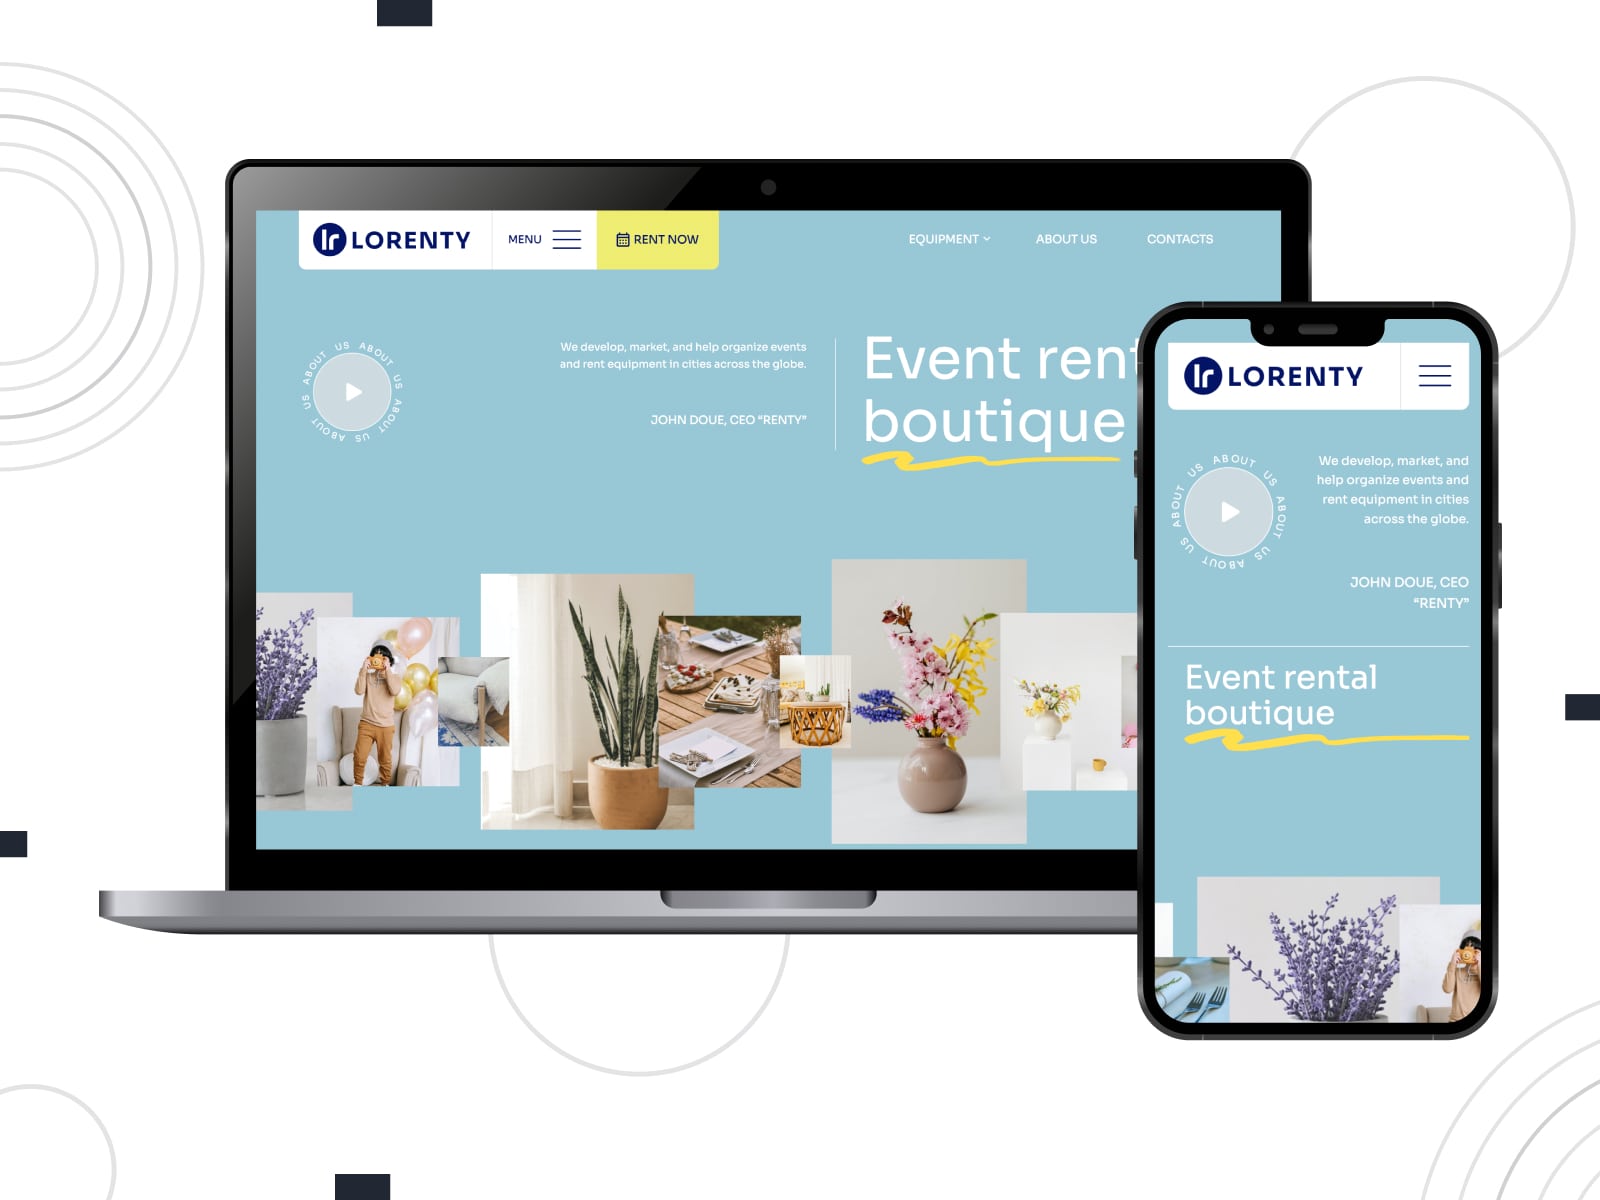 Collage of the Lorenty party rental website template for WordPress websites in blue, yellow and gray colors.